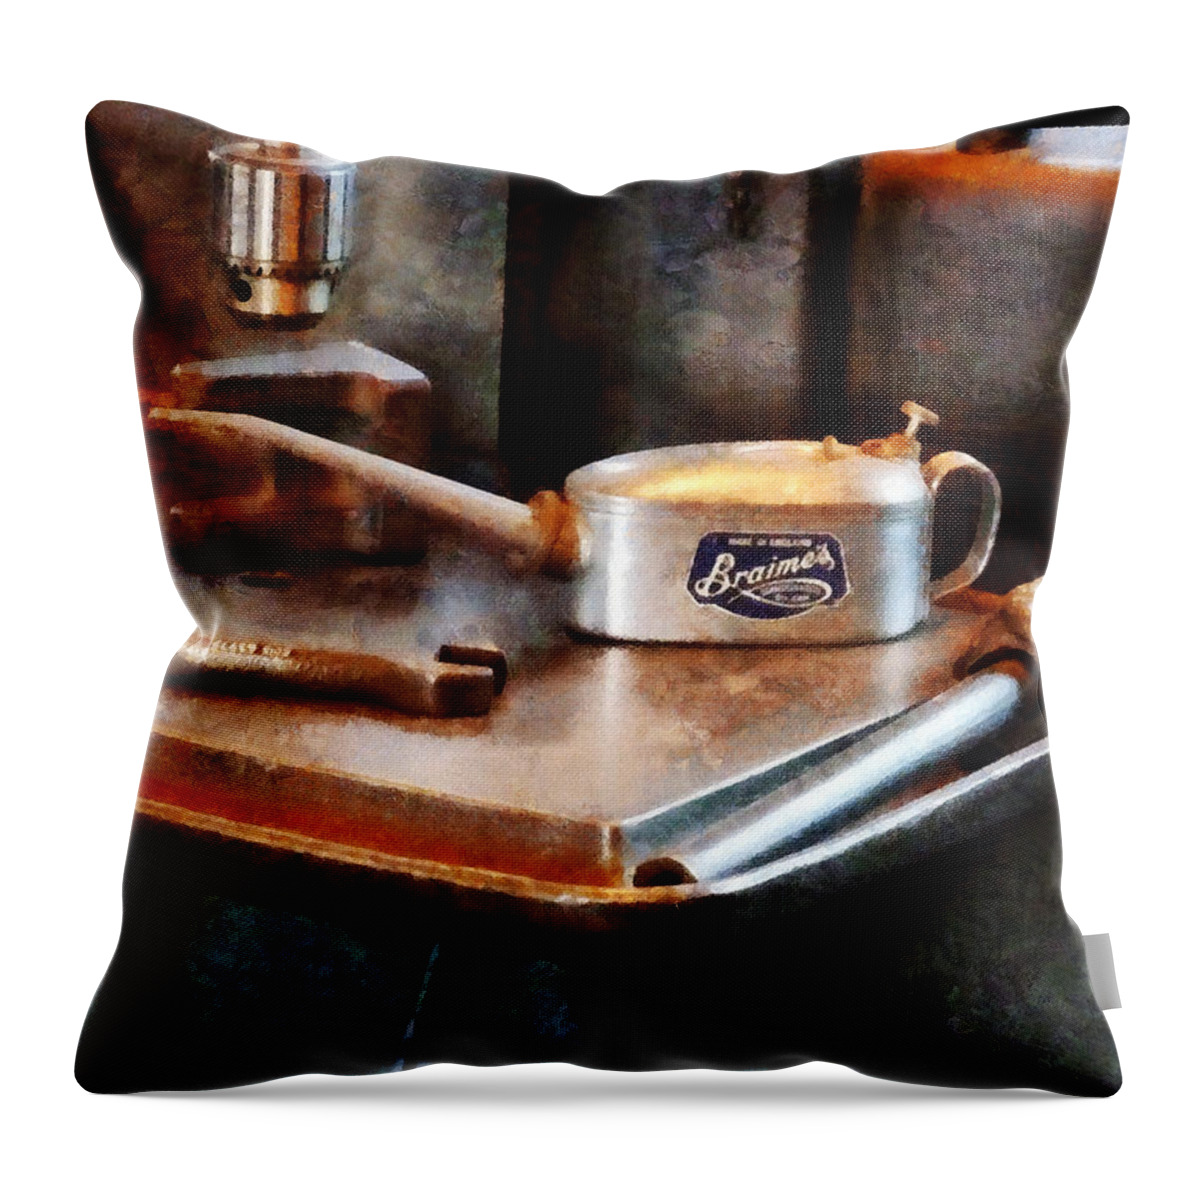 Construction Throw Pillow featuring the photograph Oil Can and Wrench by Susan Savad